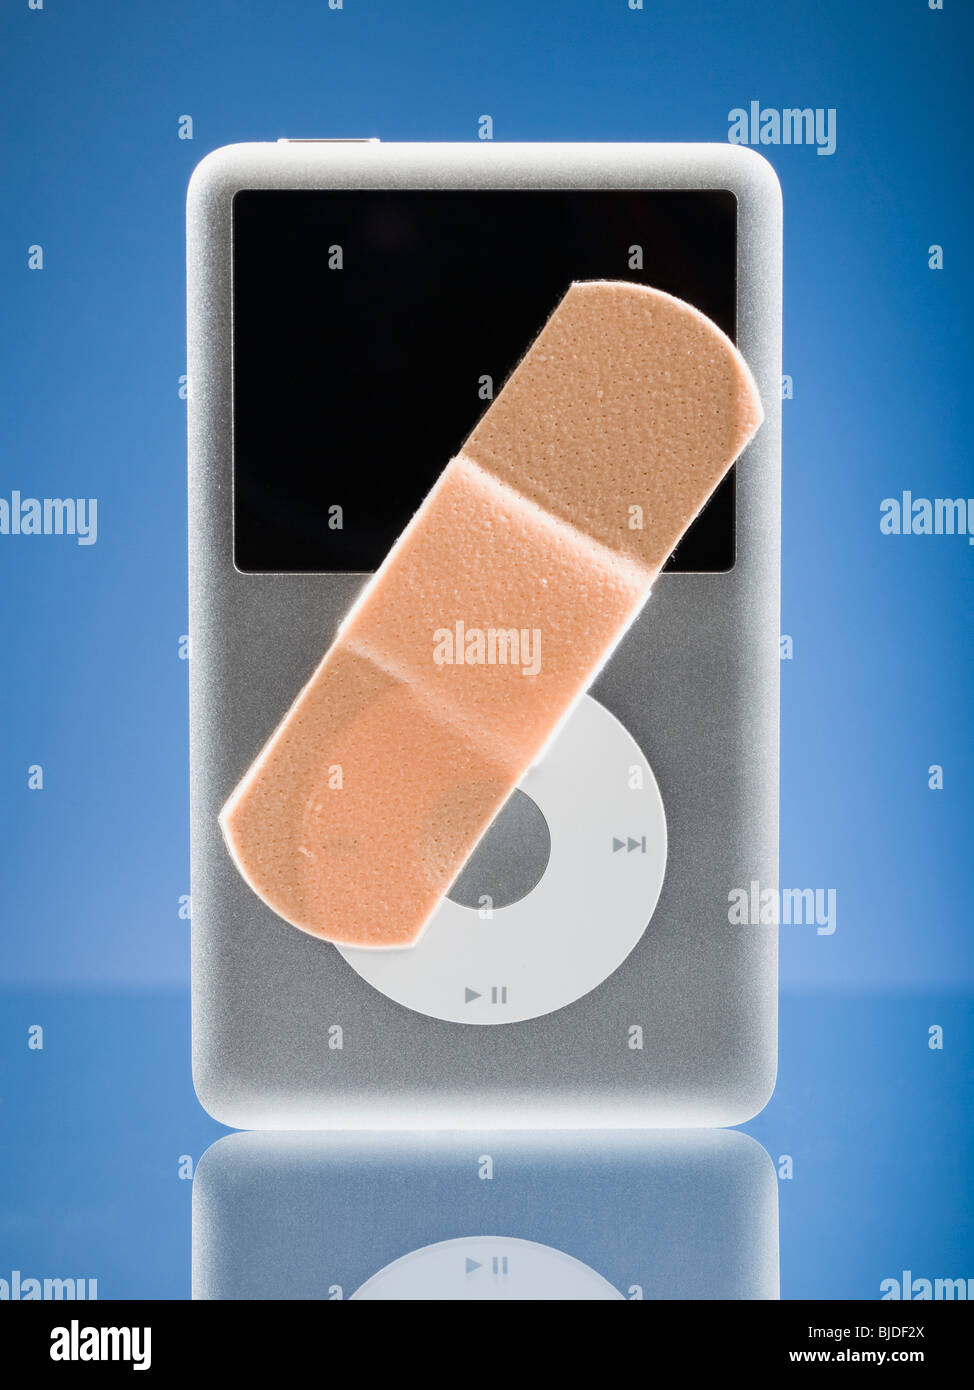 Band-aid on an Ipod. Stock Photo